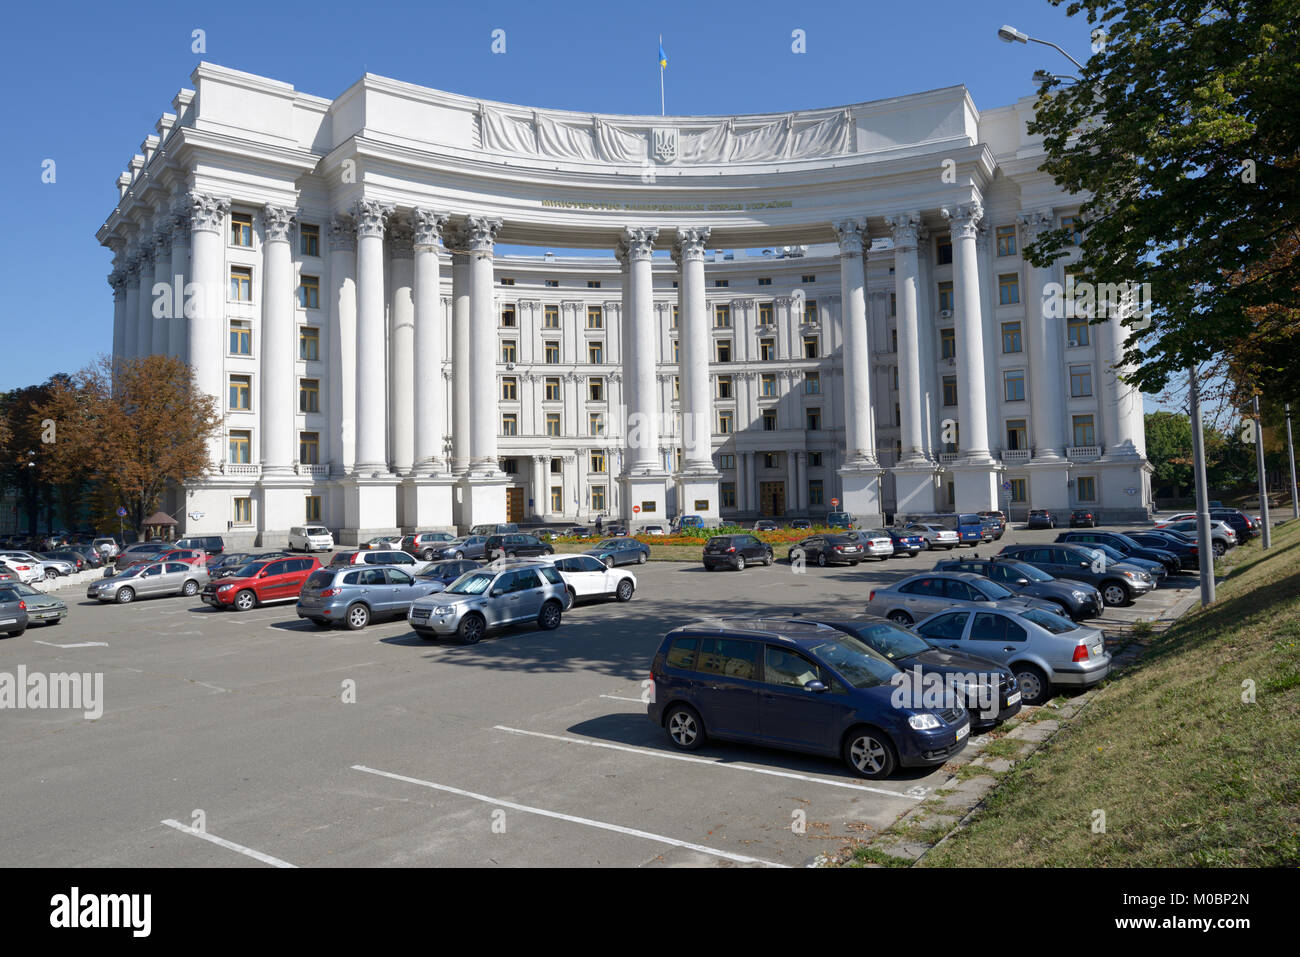 Kiev, Ukraine - August 20, 2013: Building of the Ministry of Foreign Affairs in Kiev, Ukraine on August 20, 2013. It's the only building erected on th Stock Photo